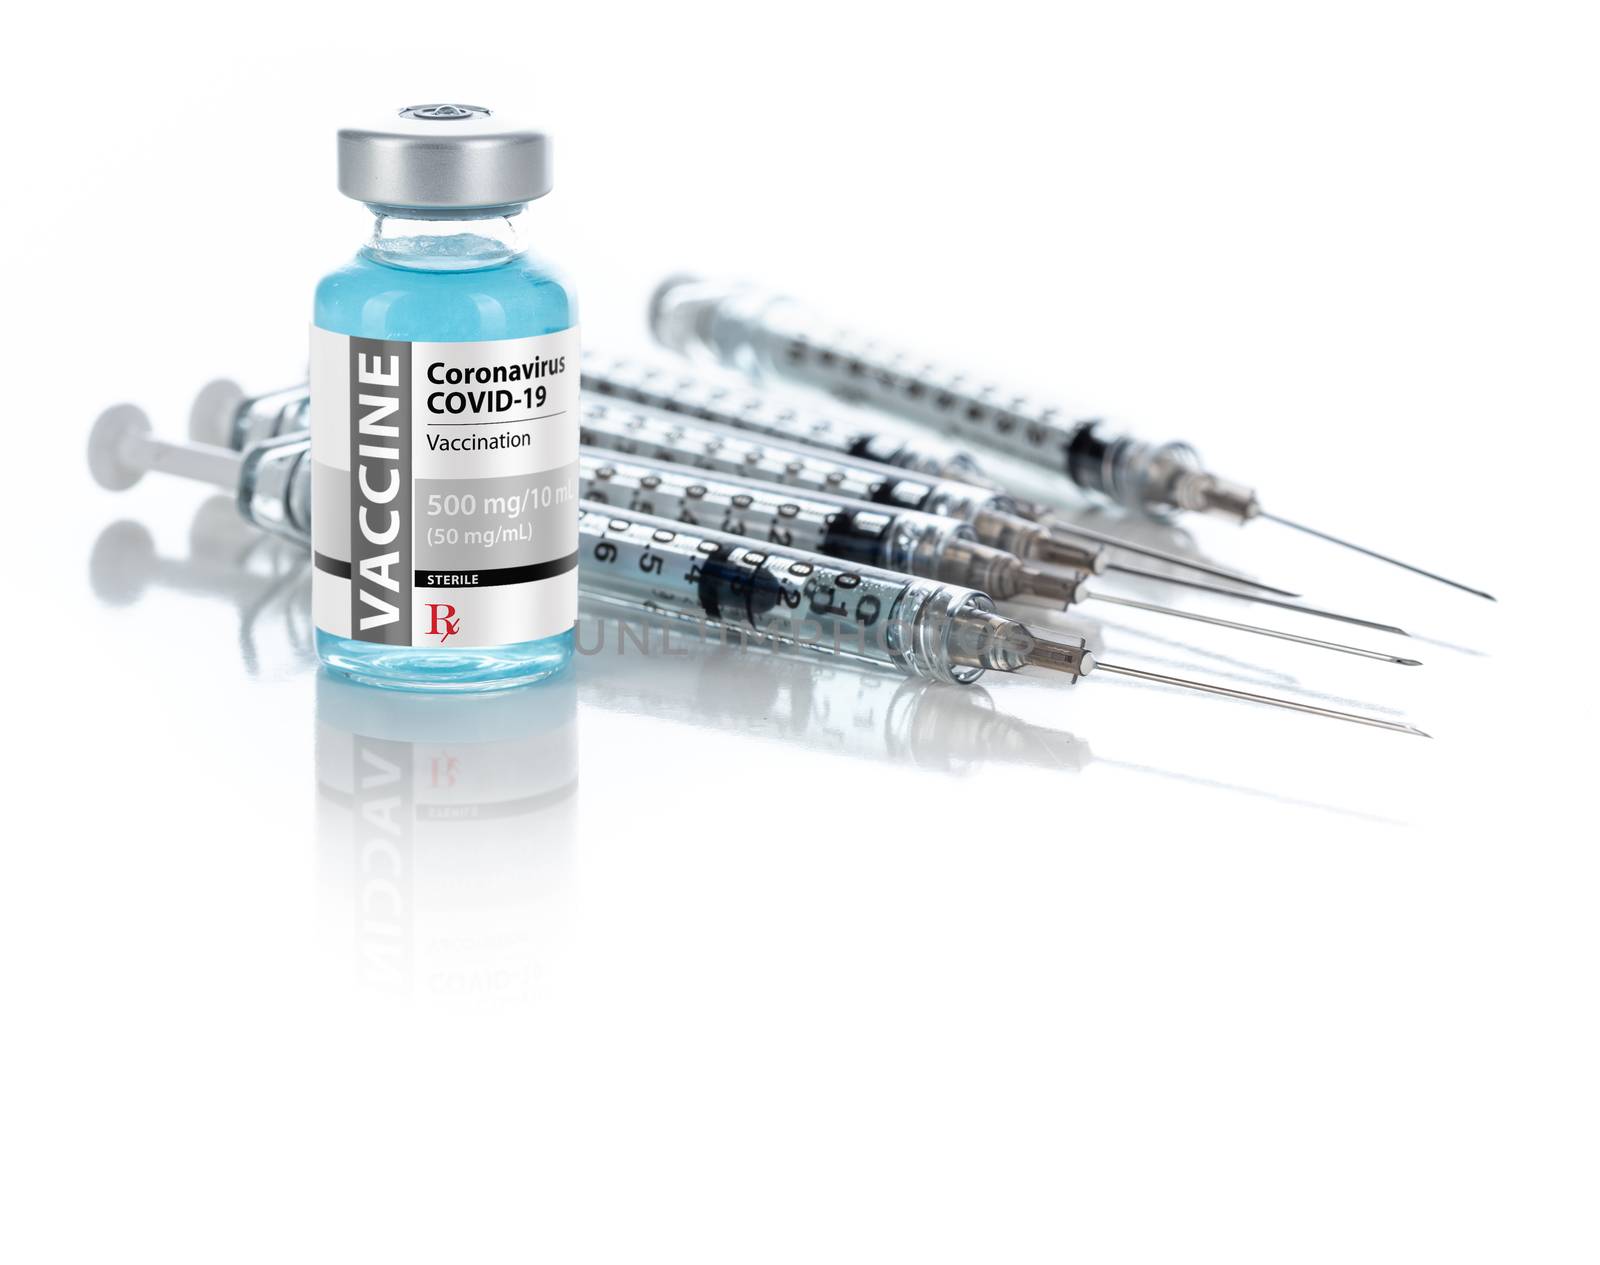 Coronavirus COVID-19 Vaccine Vial and Several Syringes On Reflec by Feverpitched